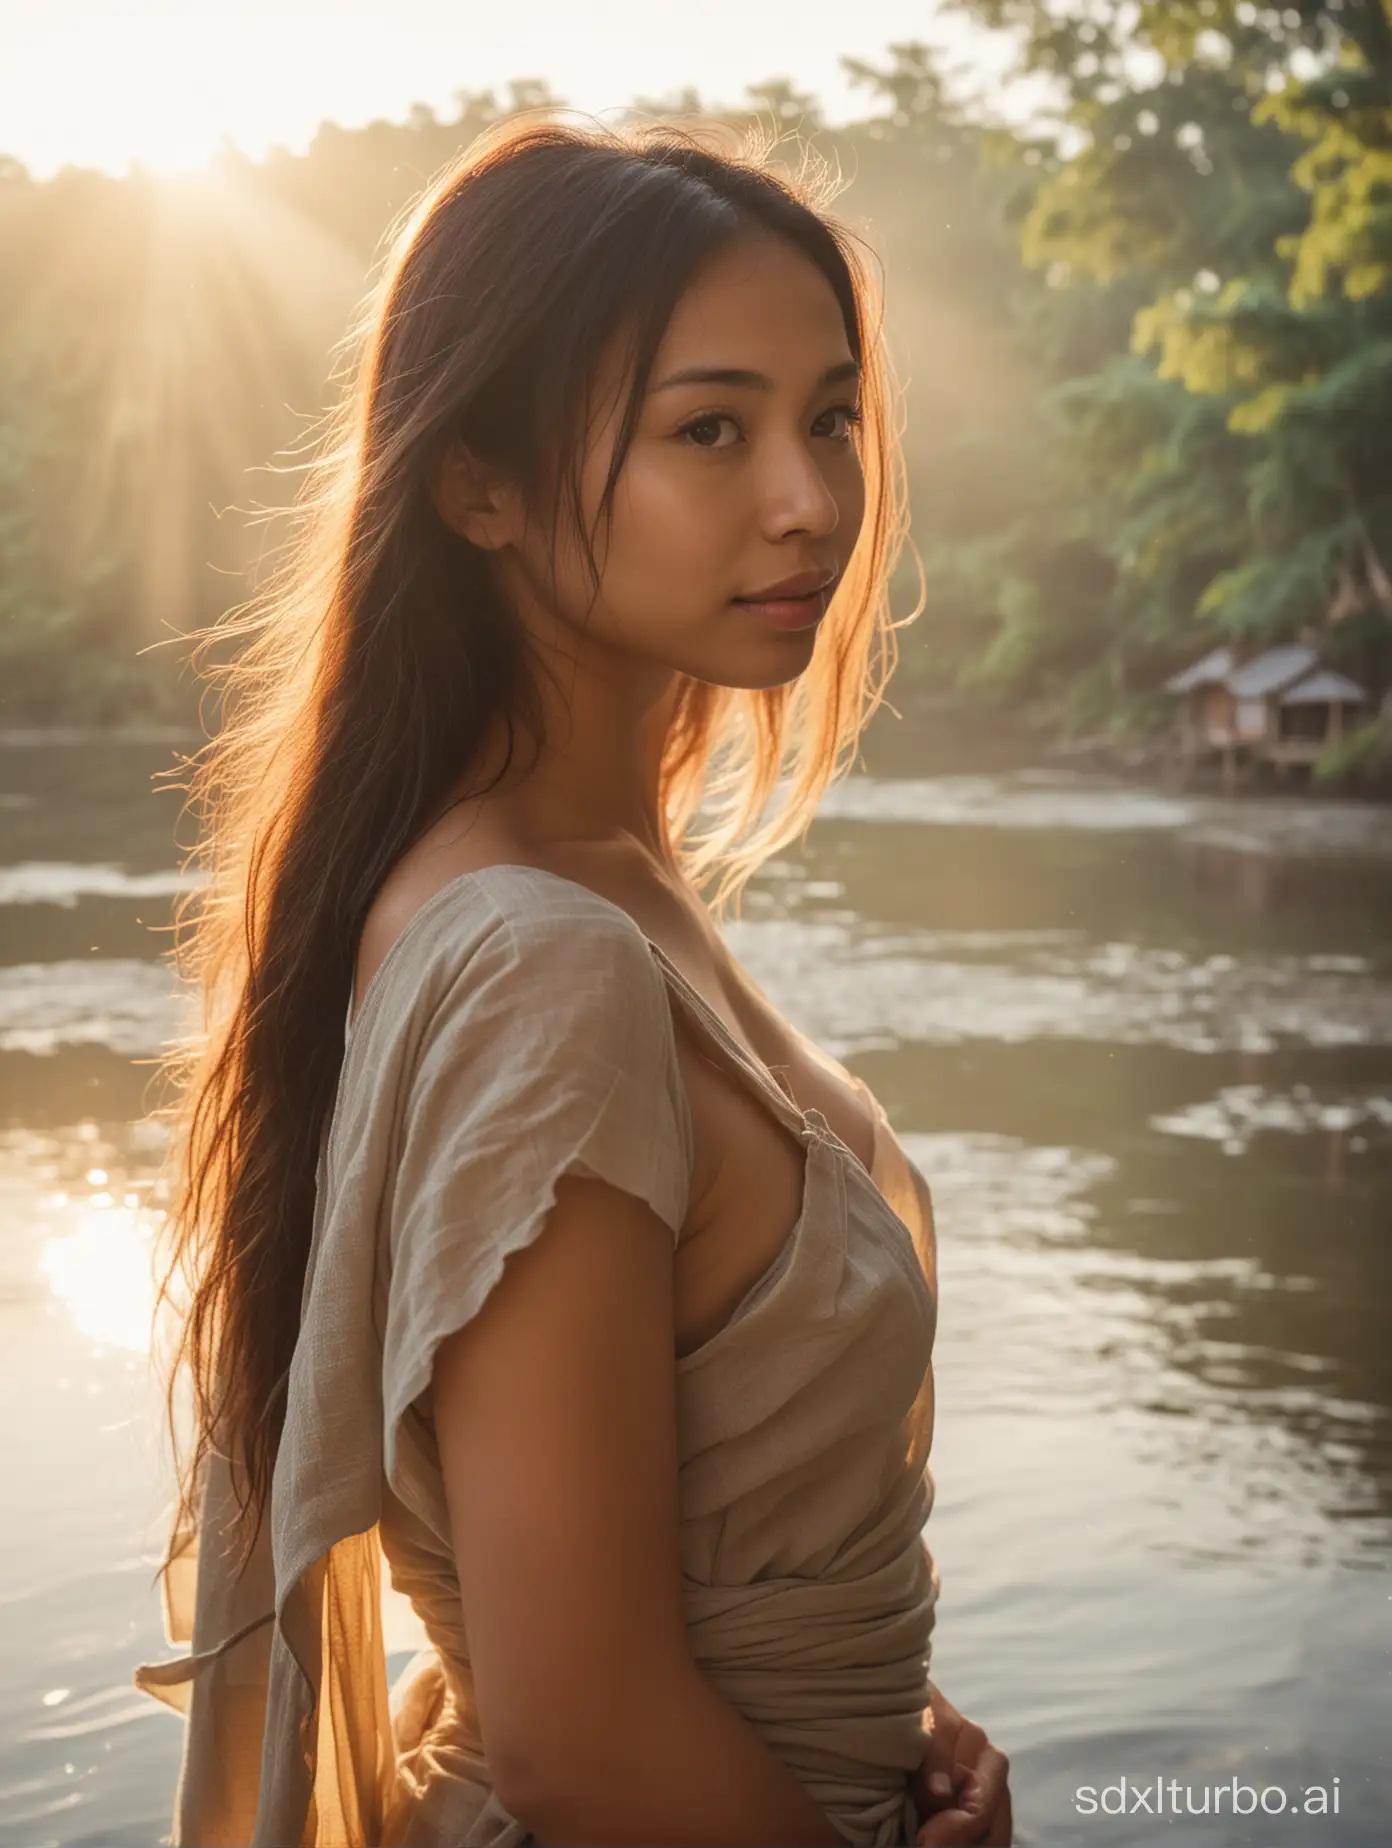 Filipina-Woman-in-Medieval-Setting-by-Misty-River-at-Sunrise